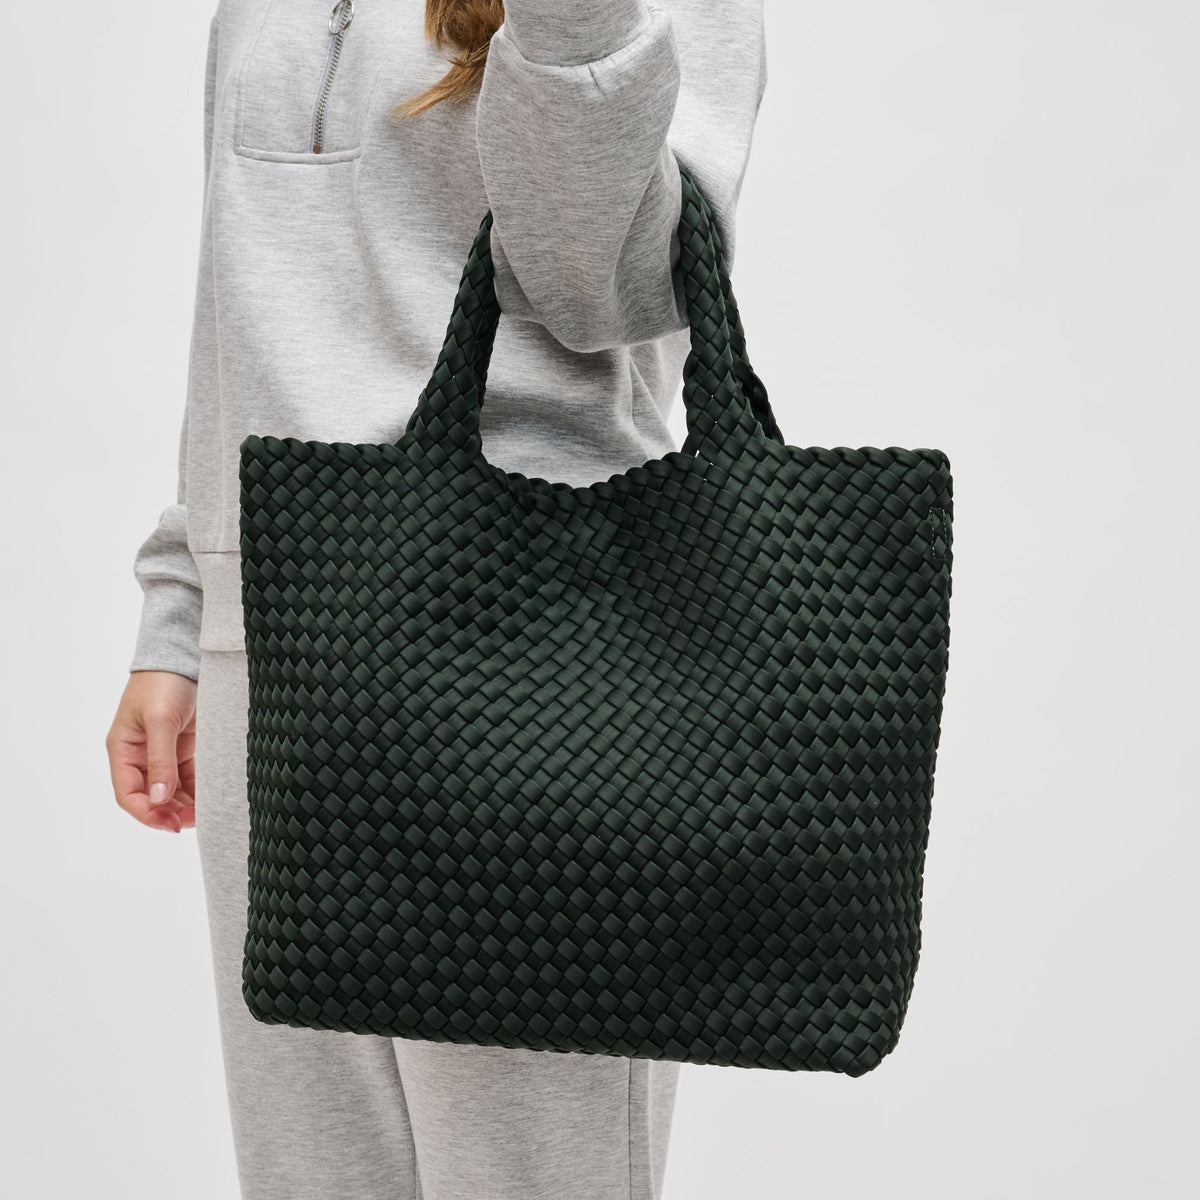 Woman wearing Olive Sol and Selene Sky's The Limit - Medium Tote 841764108843 View 1 | Olive